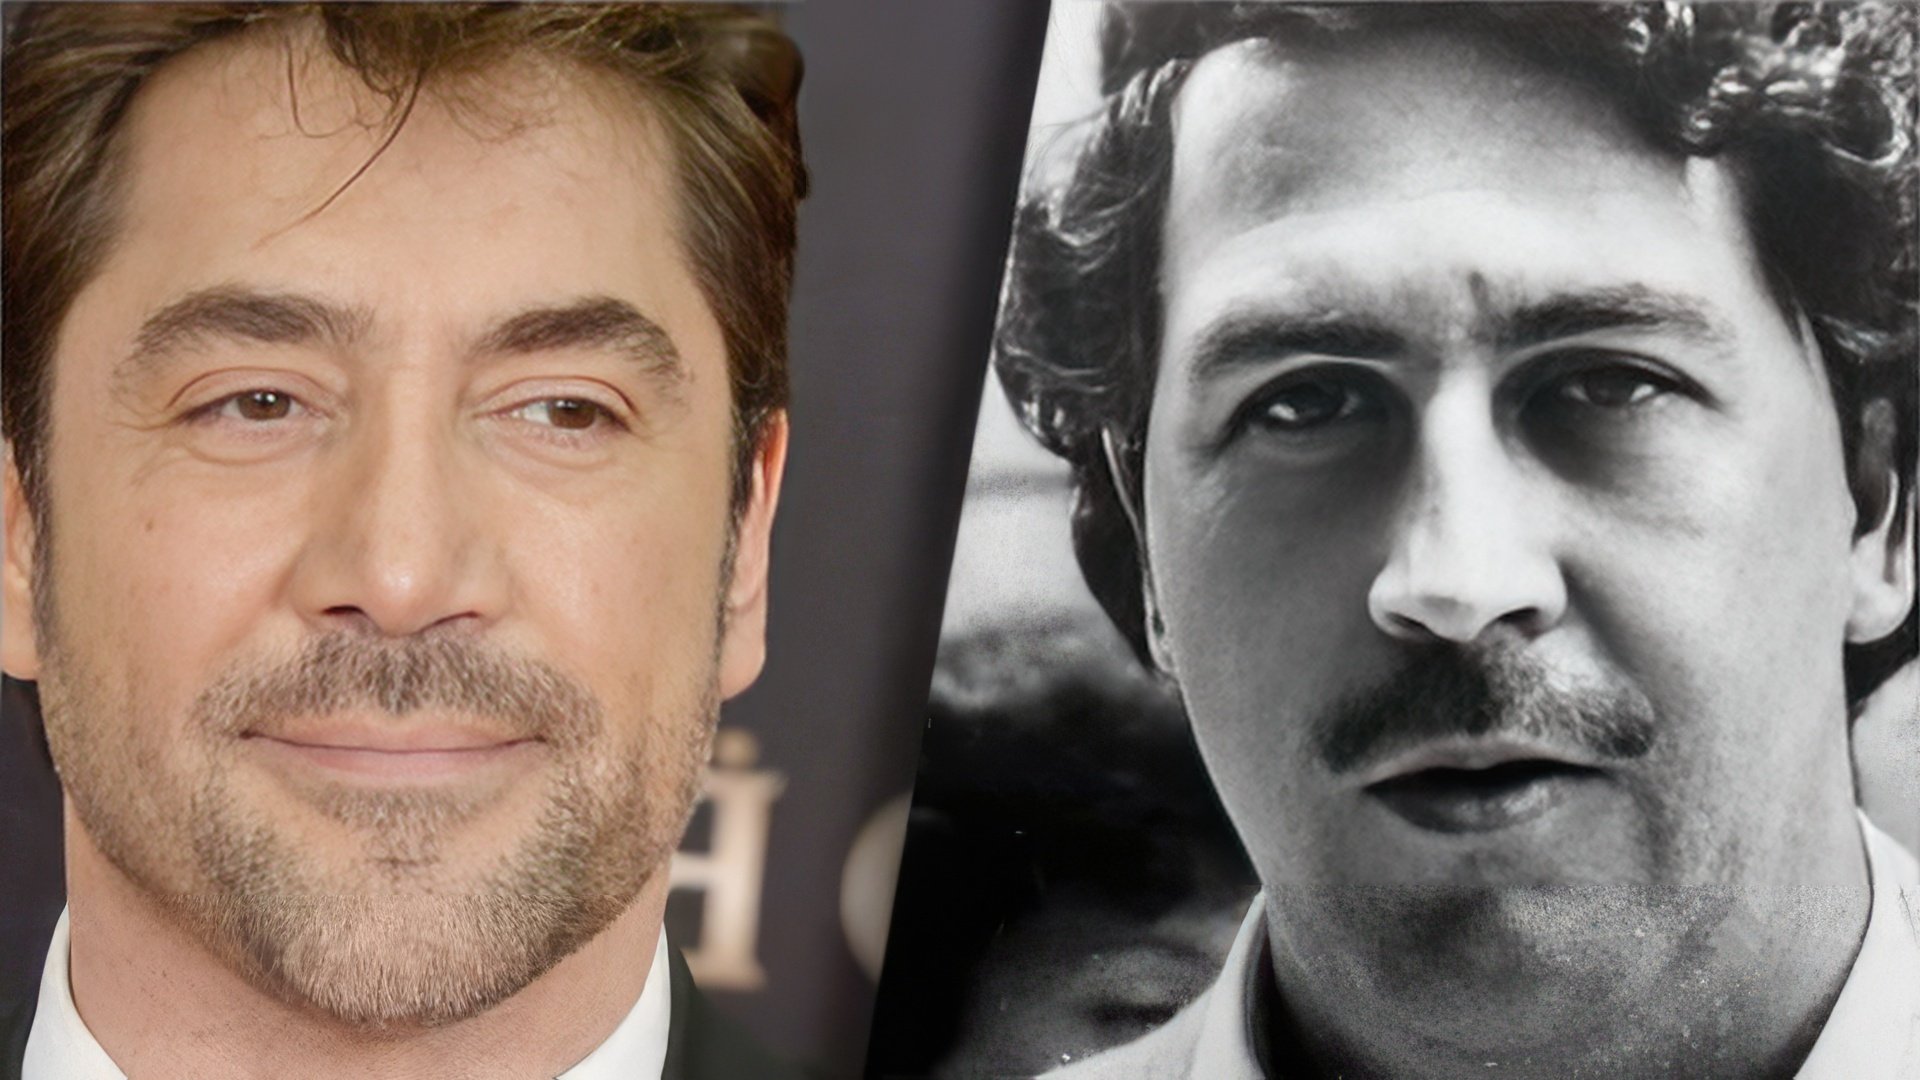 Bardem played the role of Pablo Escobar